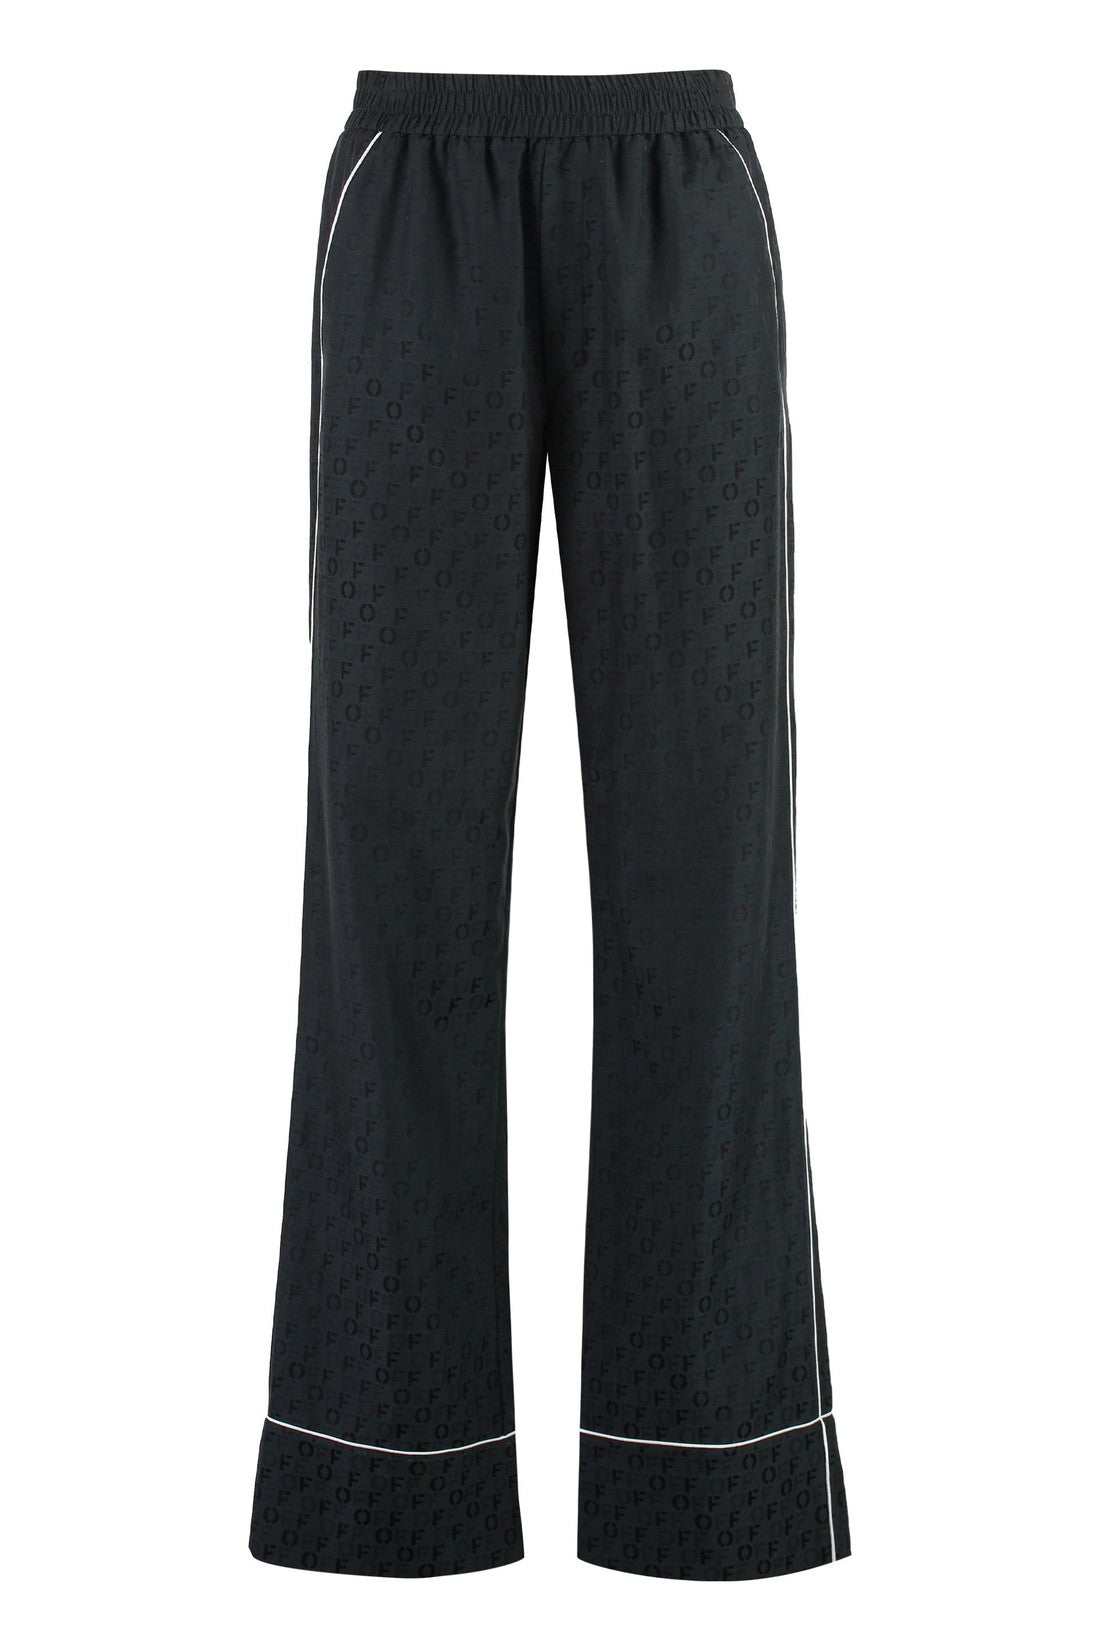 Off-White-OUTLET-SALE-Silk blend trousers-ARCHIVIST